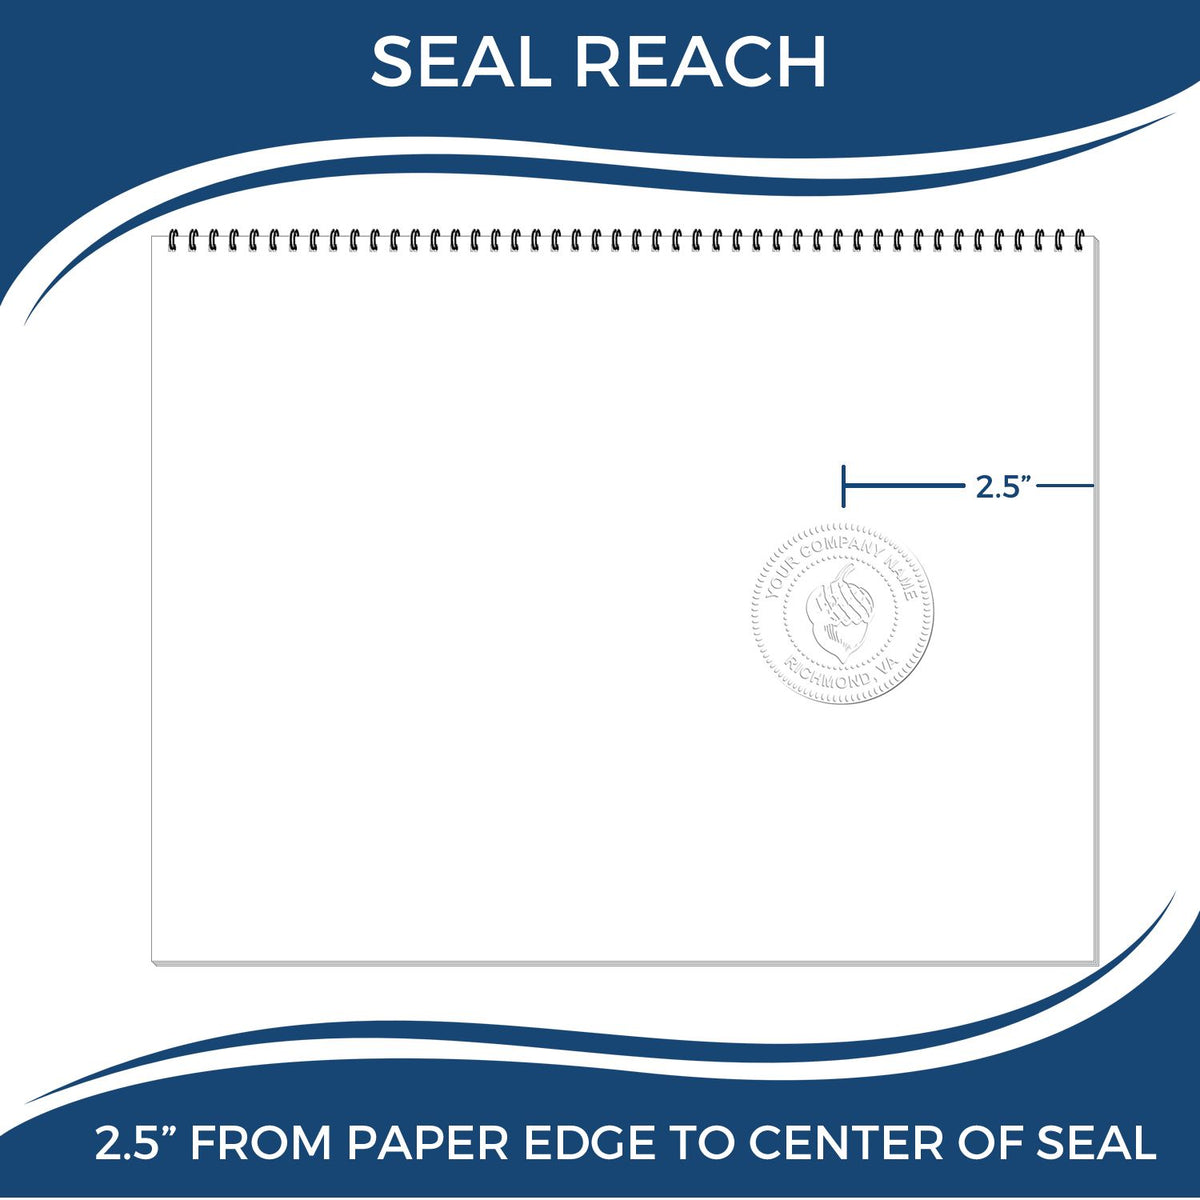 An infographic showing the seal reach which is represented by a ruler and a miniature seal image of the State of New York Long Reach Architectural Embossing Seal